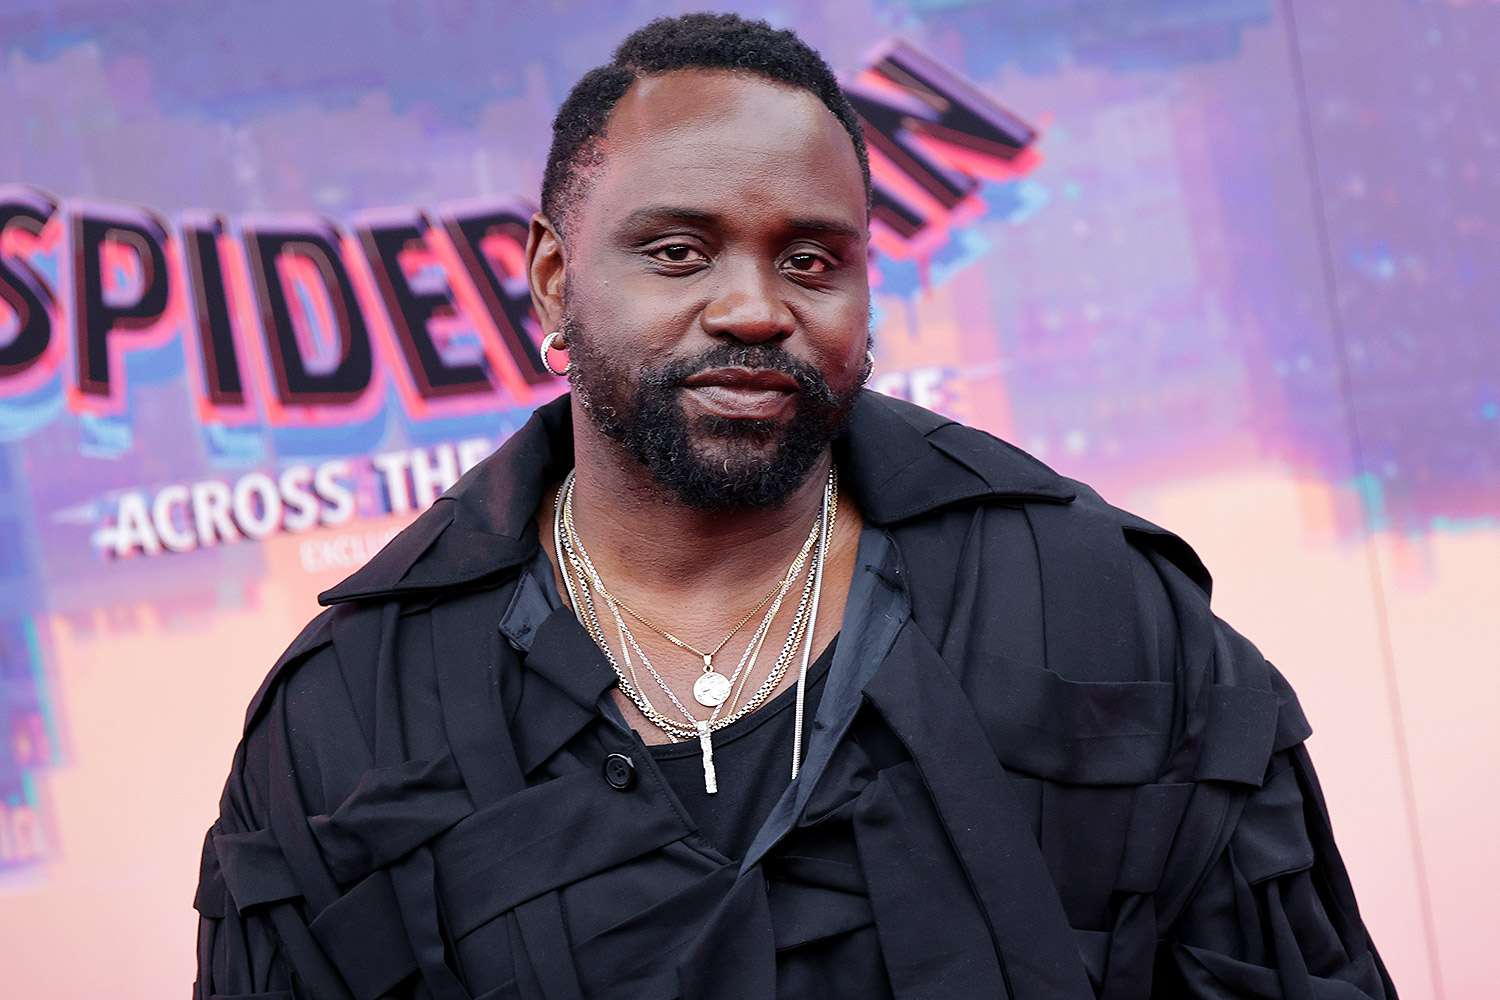 Brian Tyree Henry attends the world premiere of Sony Pictures Animation's "Spider-Man: Across The Spider-Verse" at Regency Village Theatre on May 30, 2023